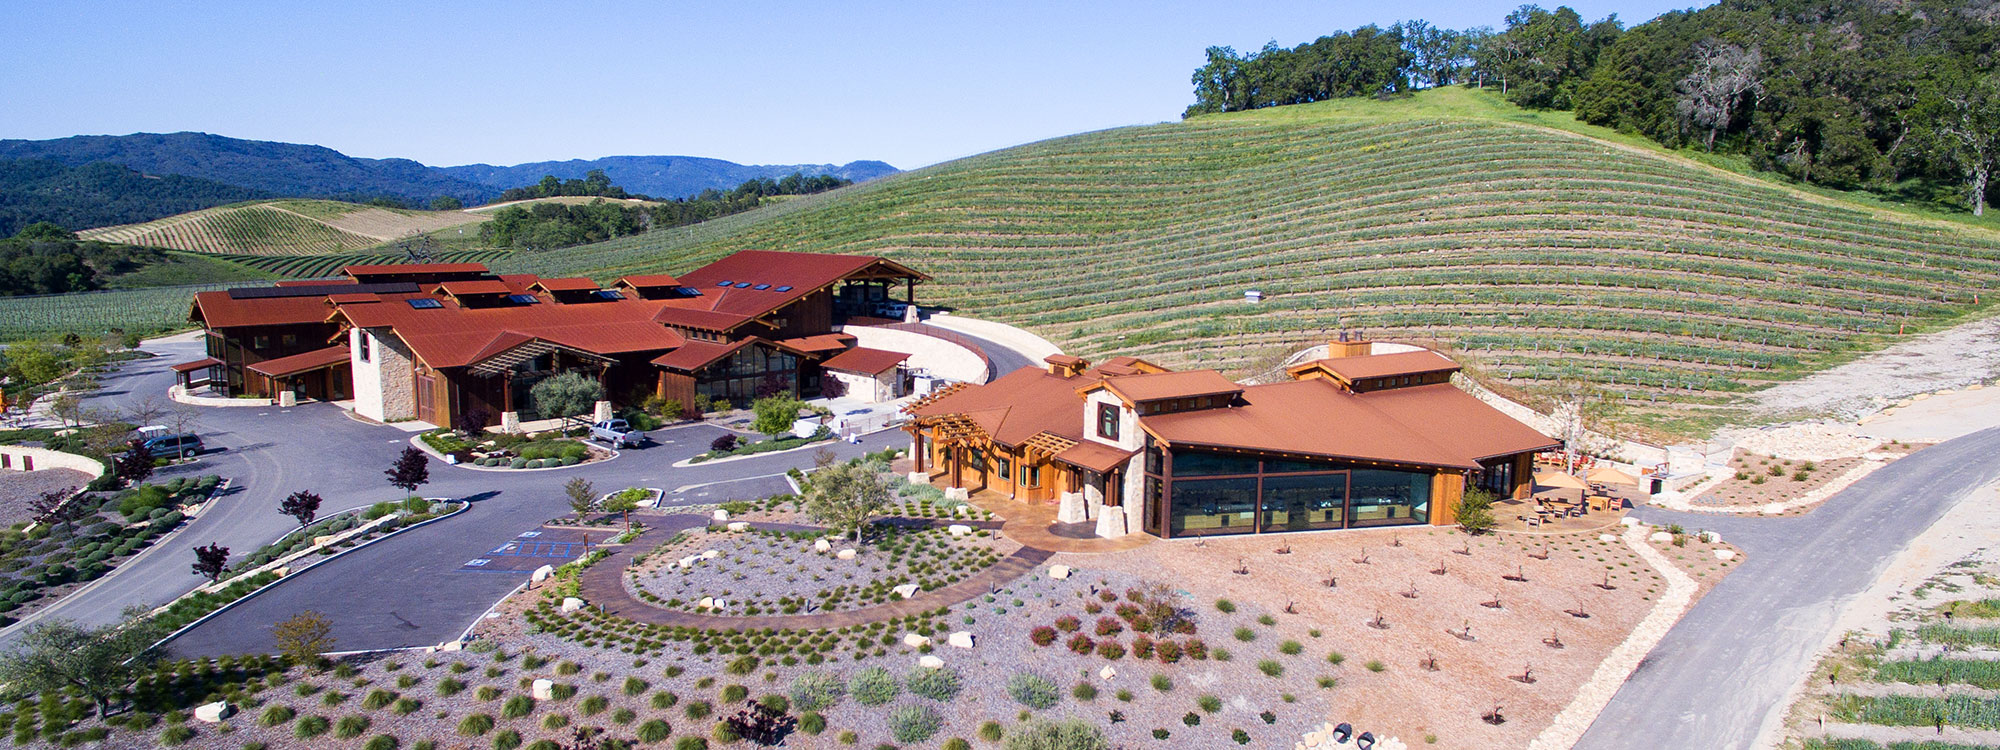 Winery Caves Contractor and Builder - JW Design & Construction